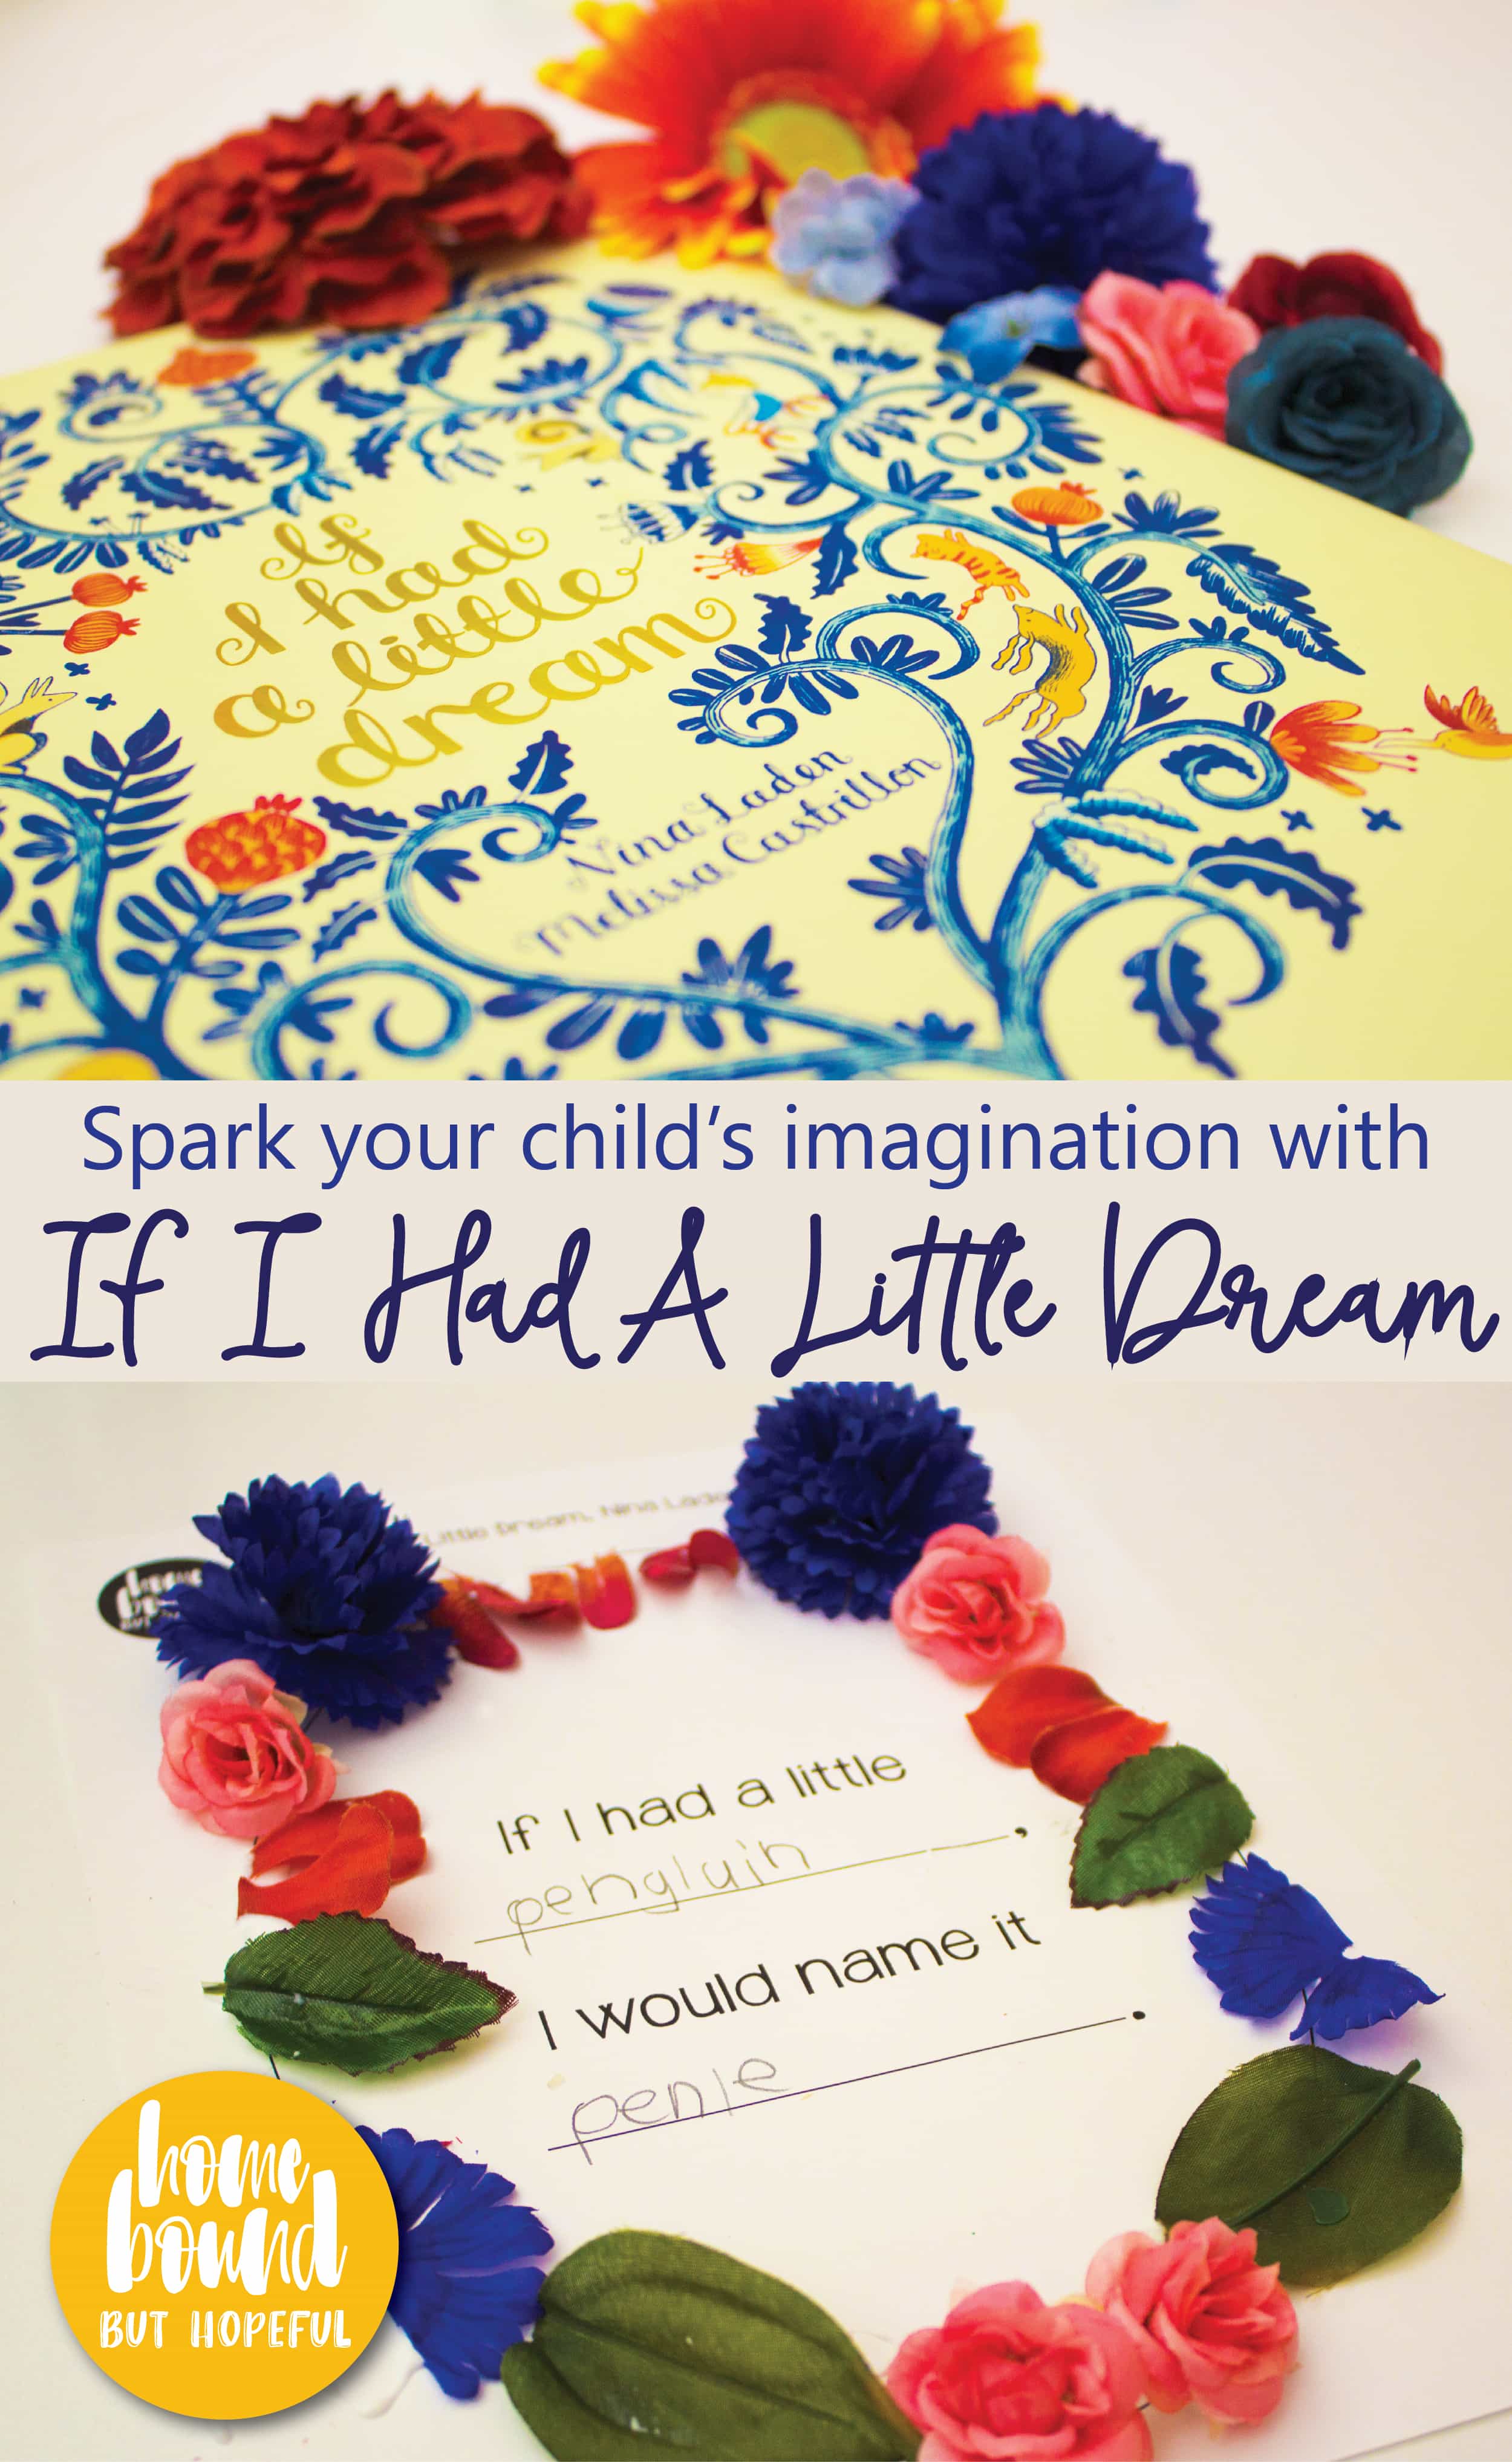 If your family could use some vibrant colors & creativity during this grey stretch of winter, I have the perfect solution. Share the picture book "If I Had A Little Dream" with your children. It will spark their imagination and get them talking about their dreams, while the accompanying craft will bring some brightness to your days!